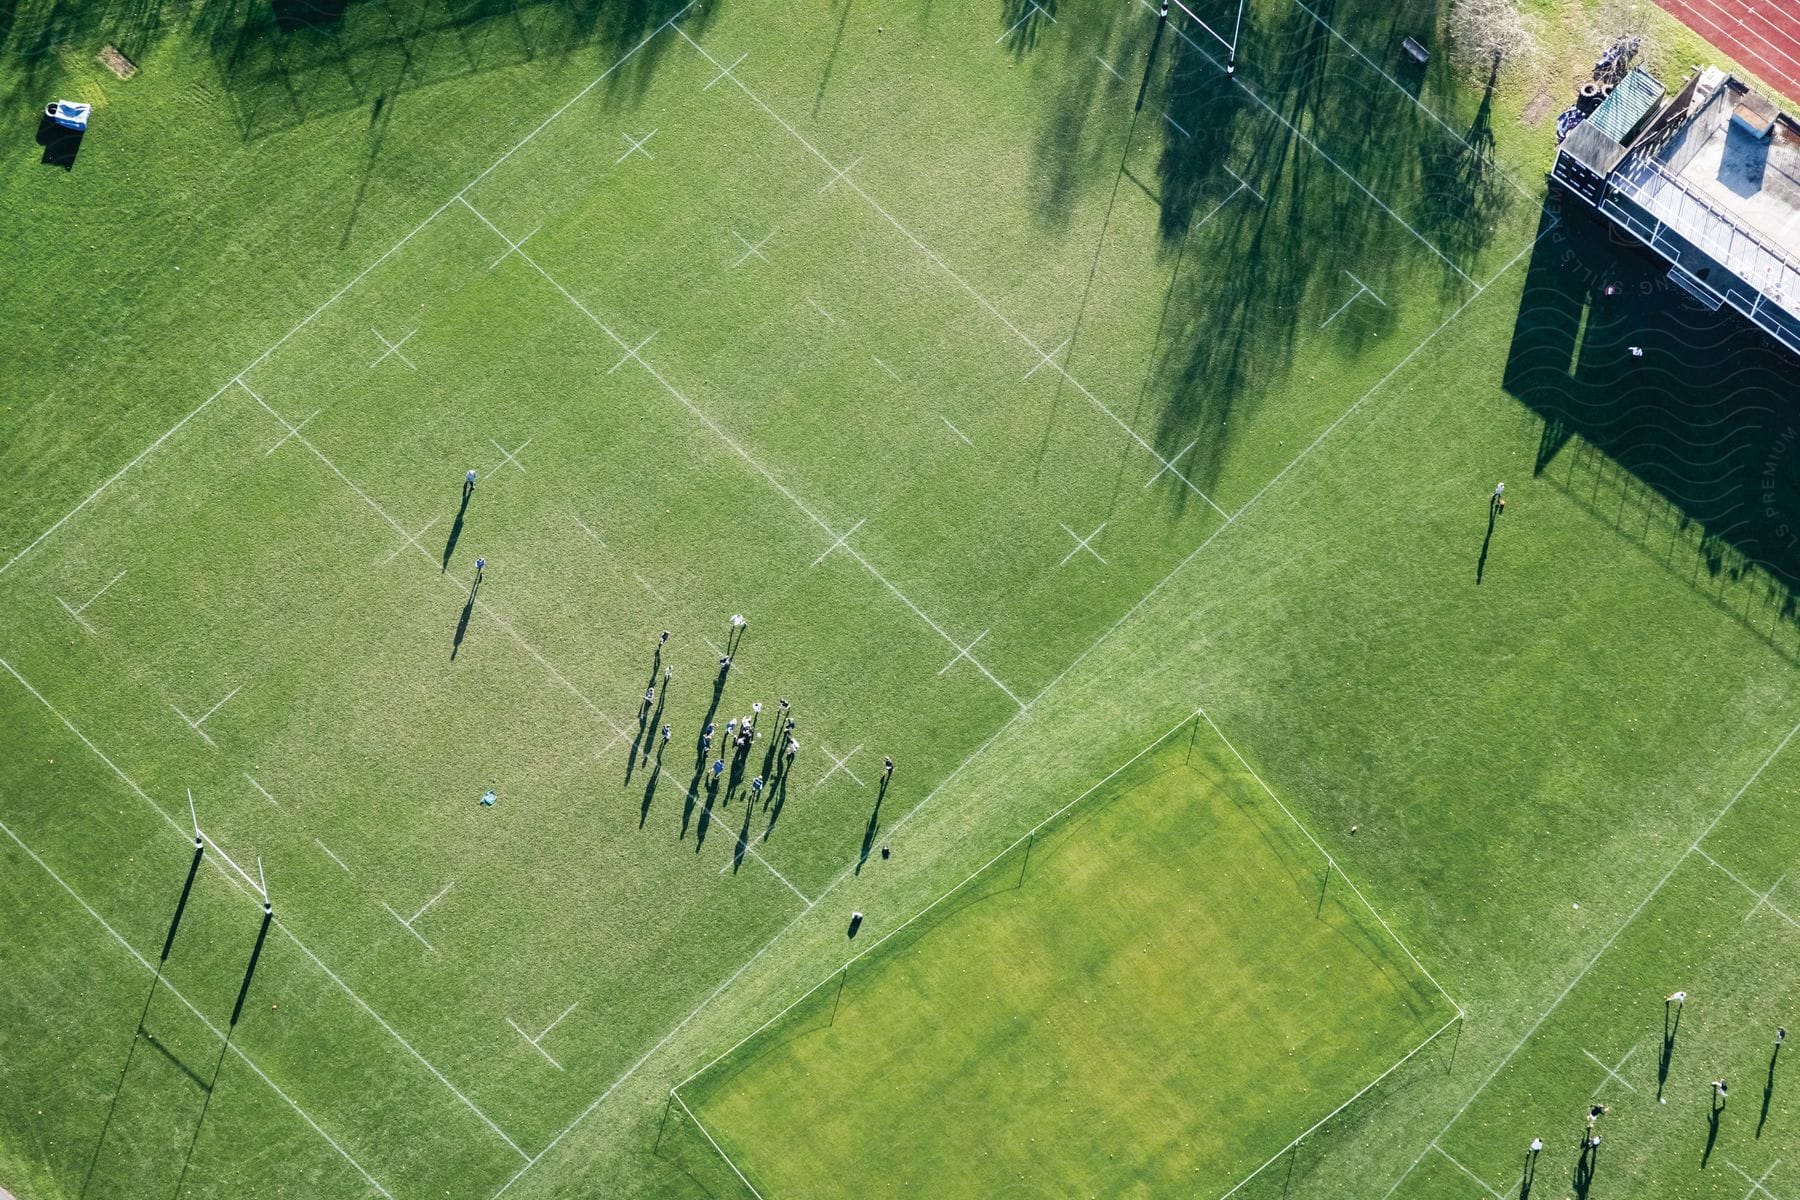 Rugby players on a rugby field